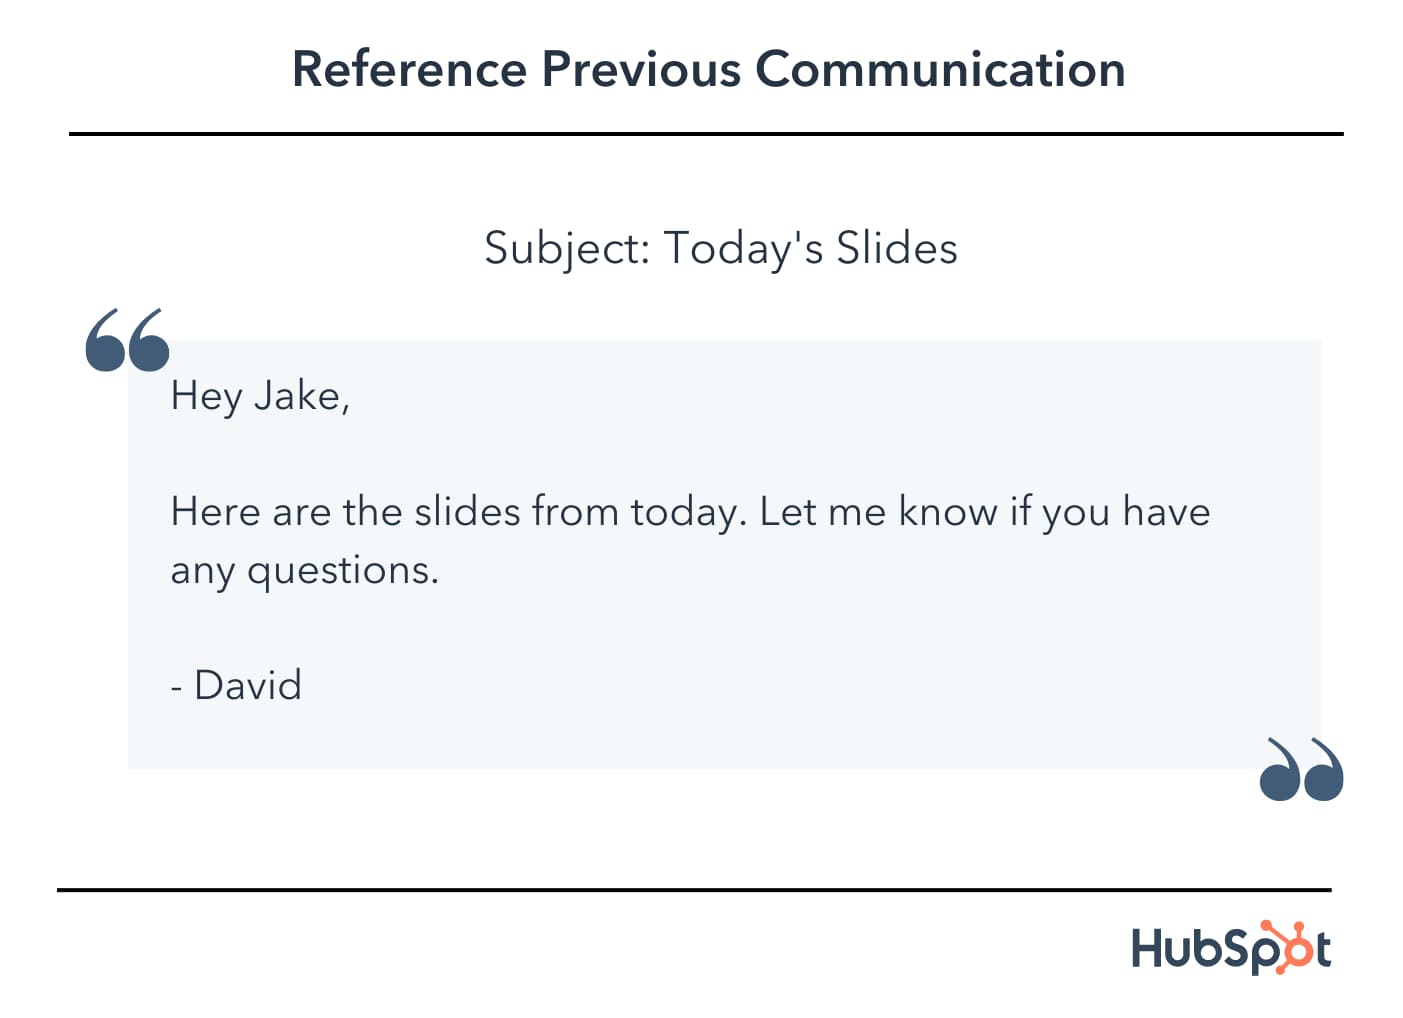 email example, Hey Jake, Here are the slides from today. Let me know if you have any questions. - David